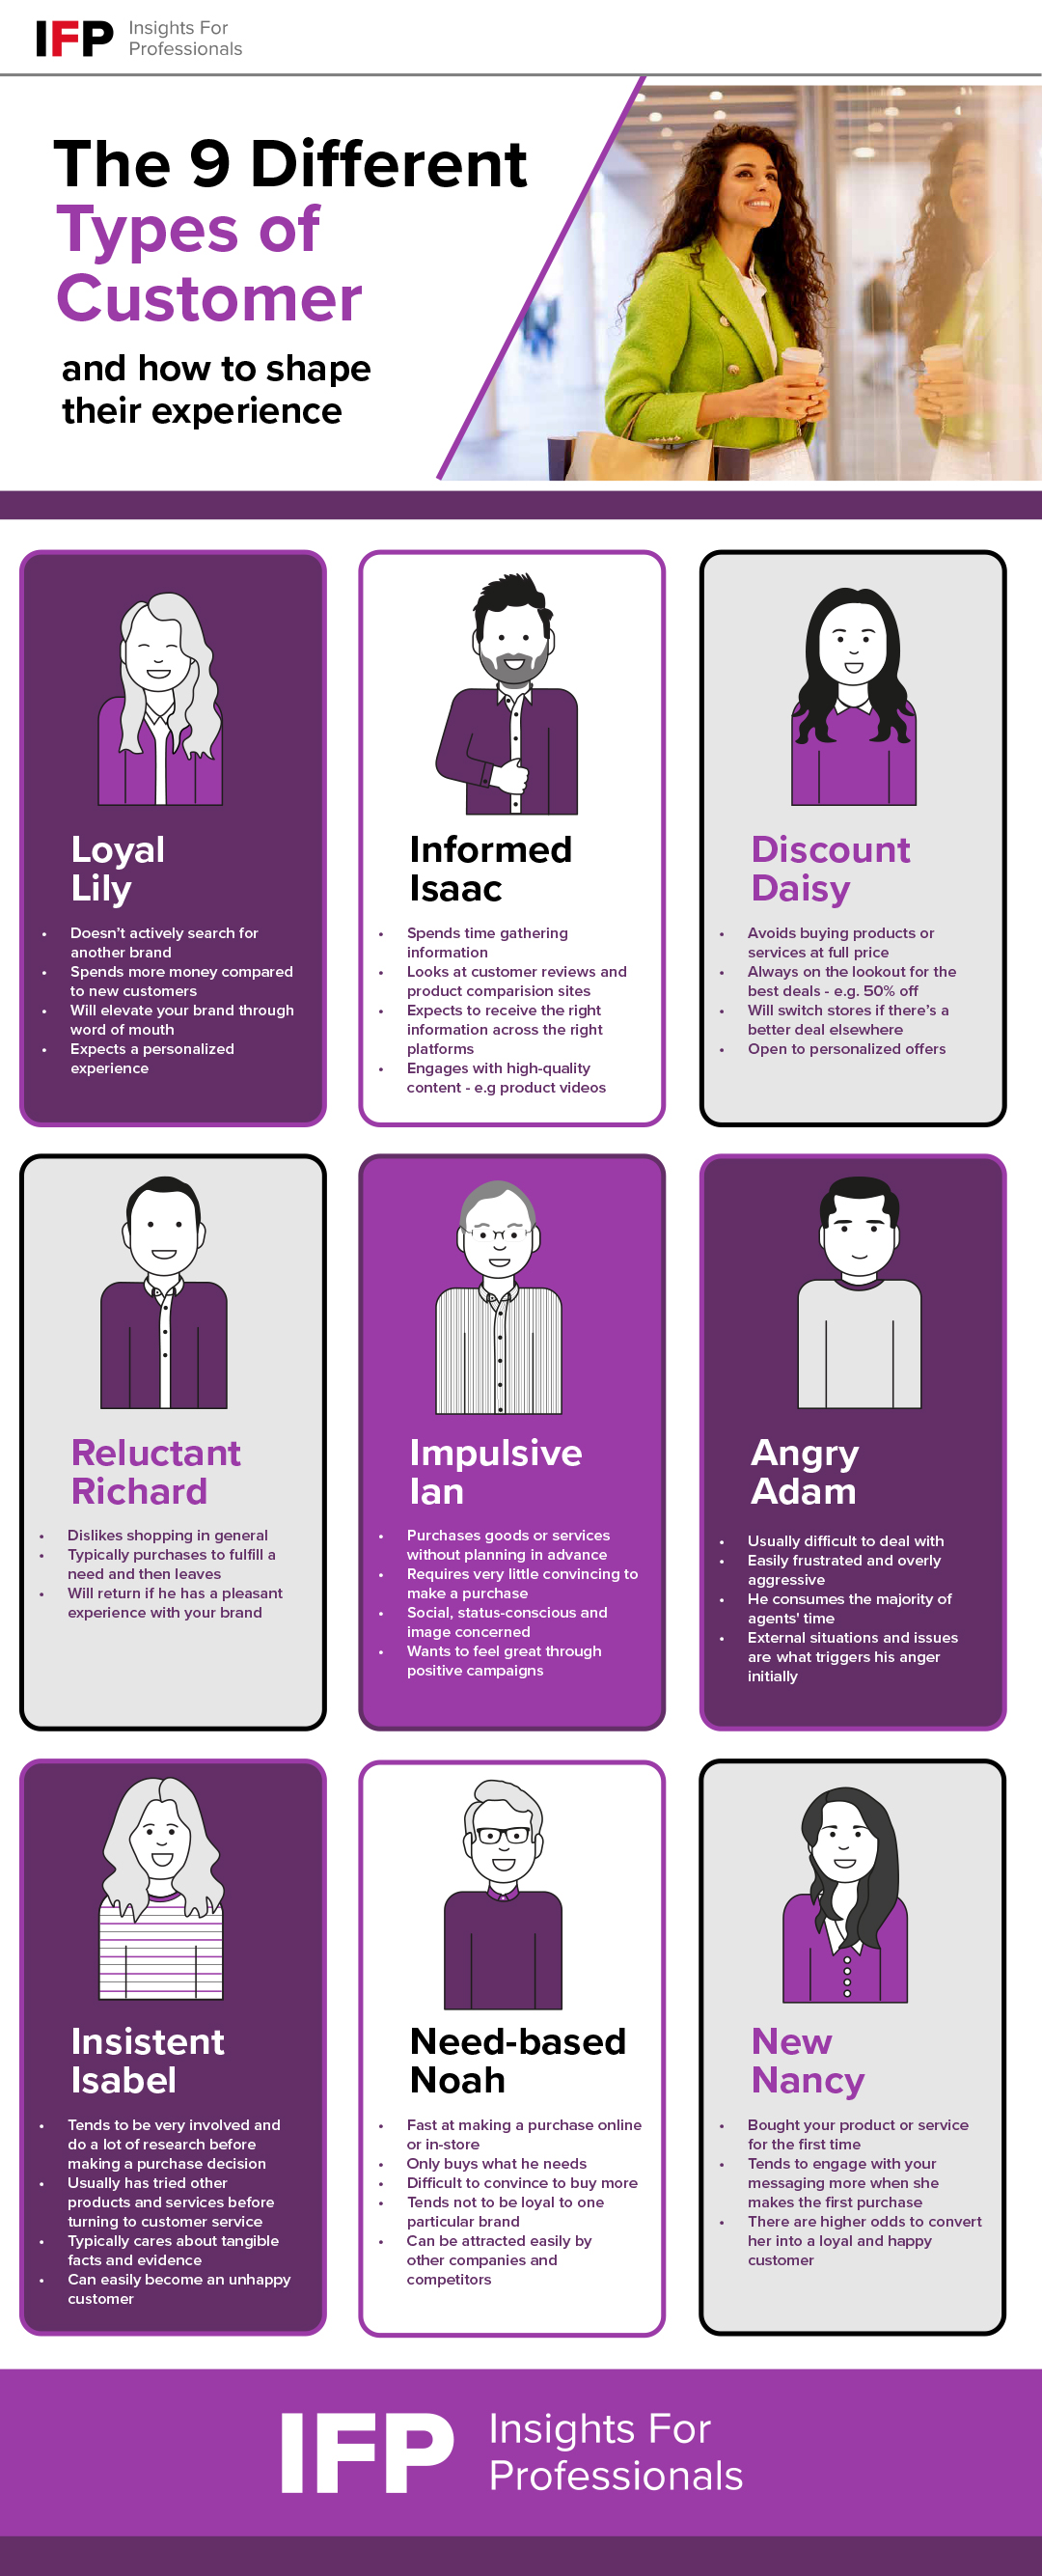 IFP visual showing 9 different types of customer and their personalities